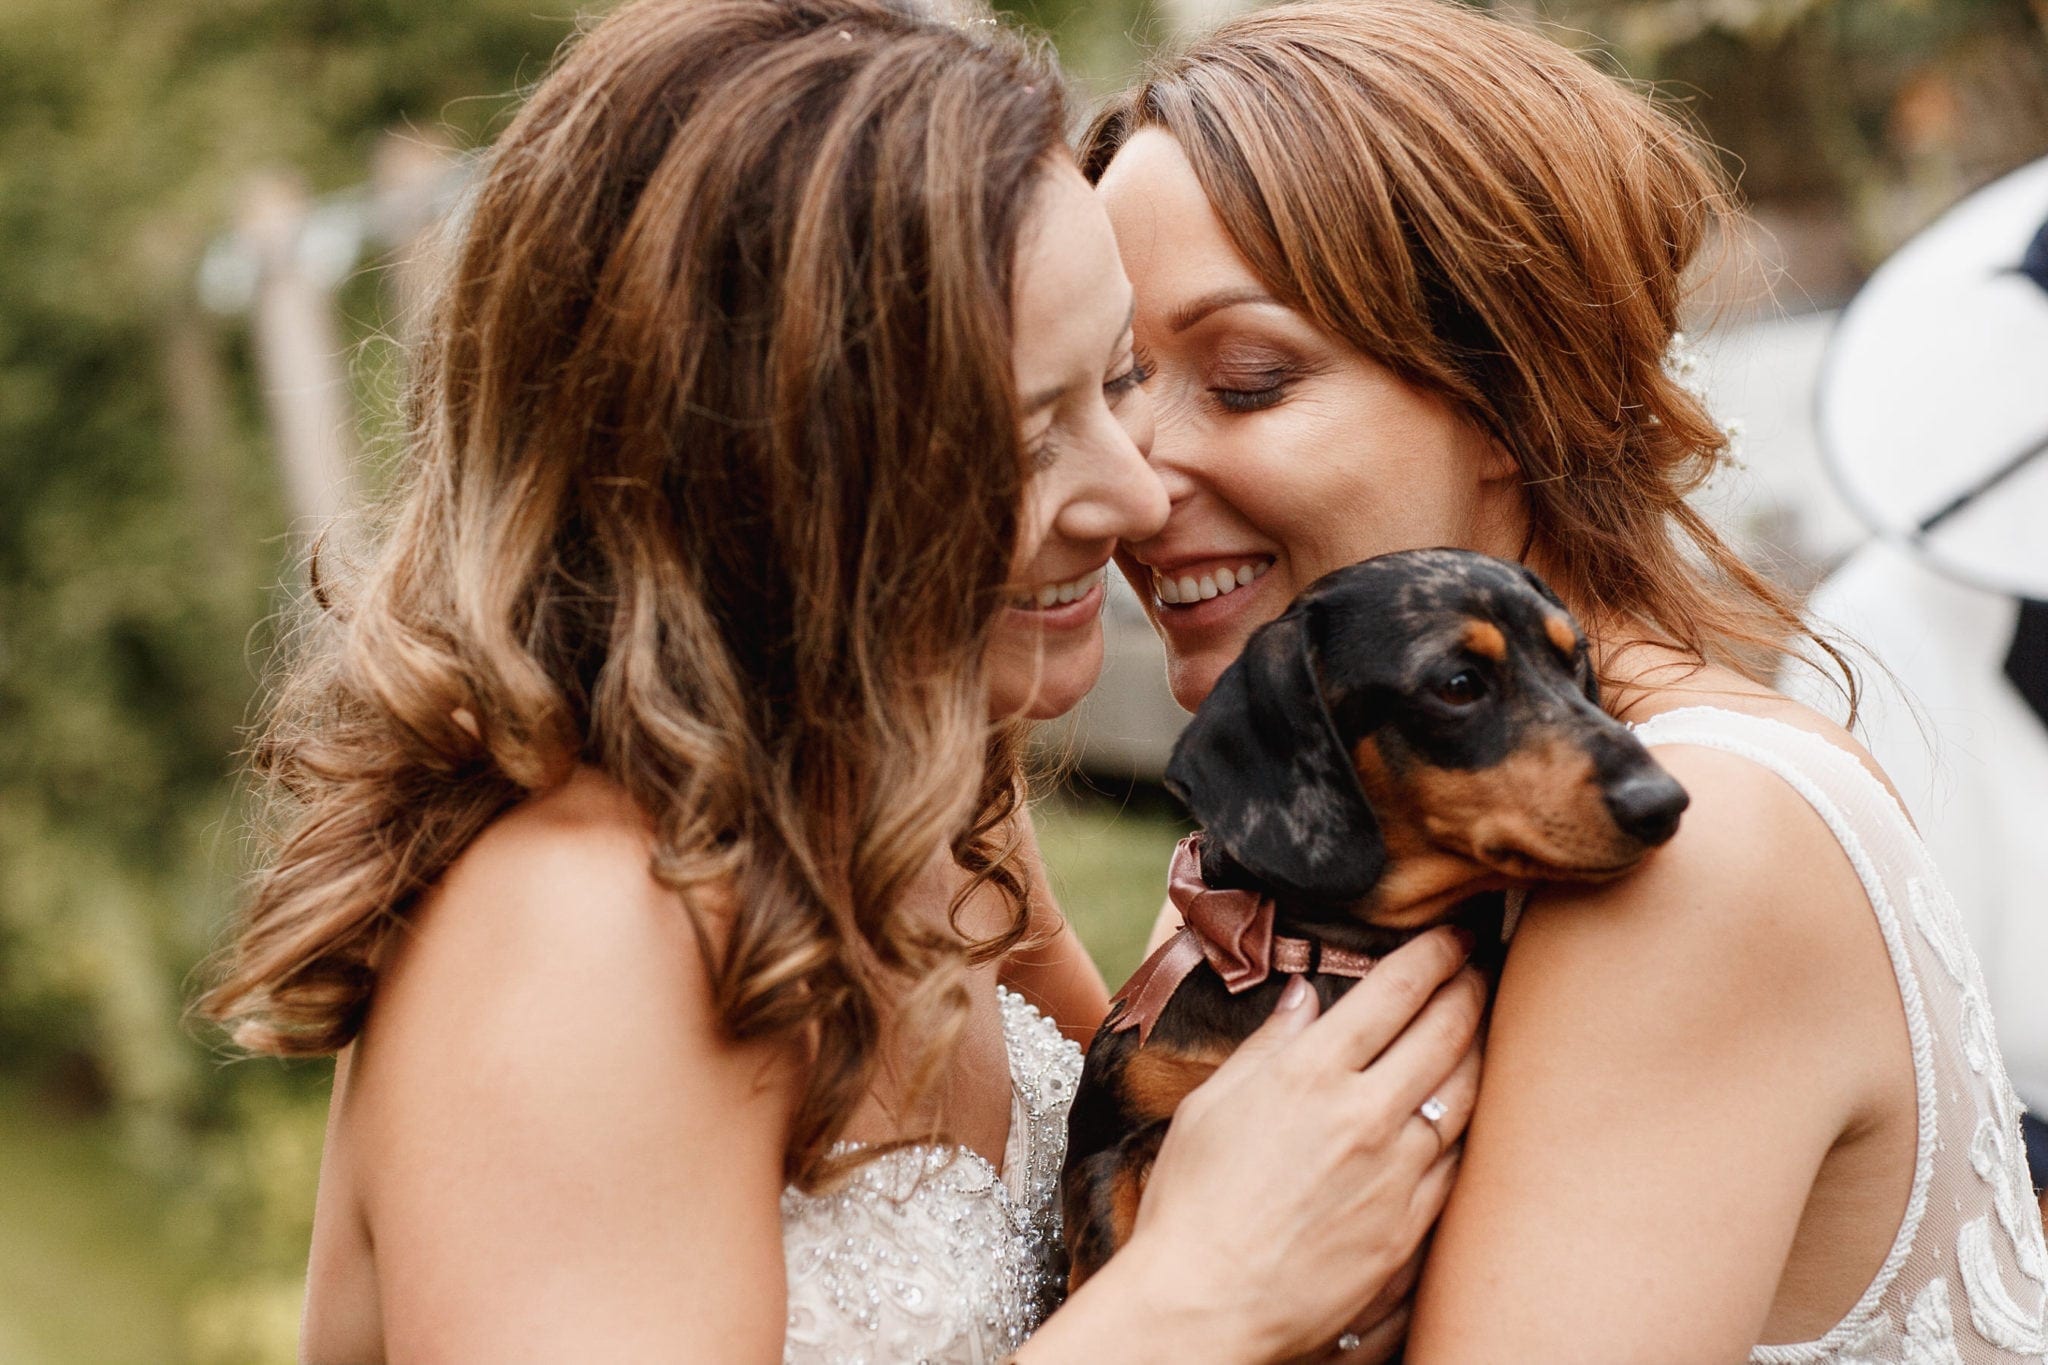 Brides and their dog